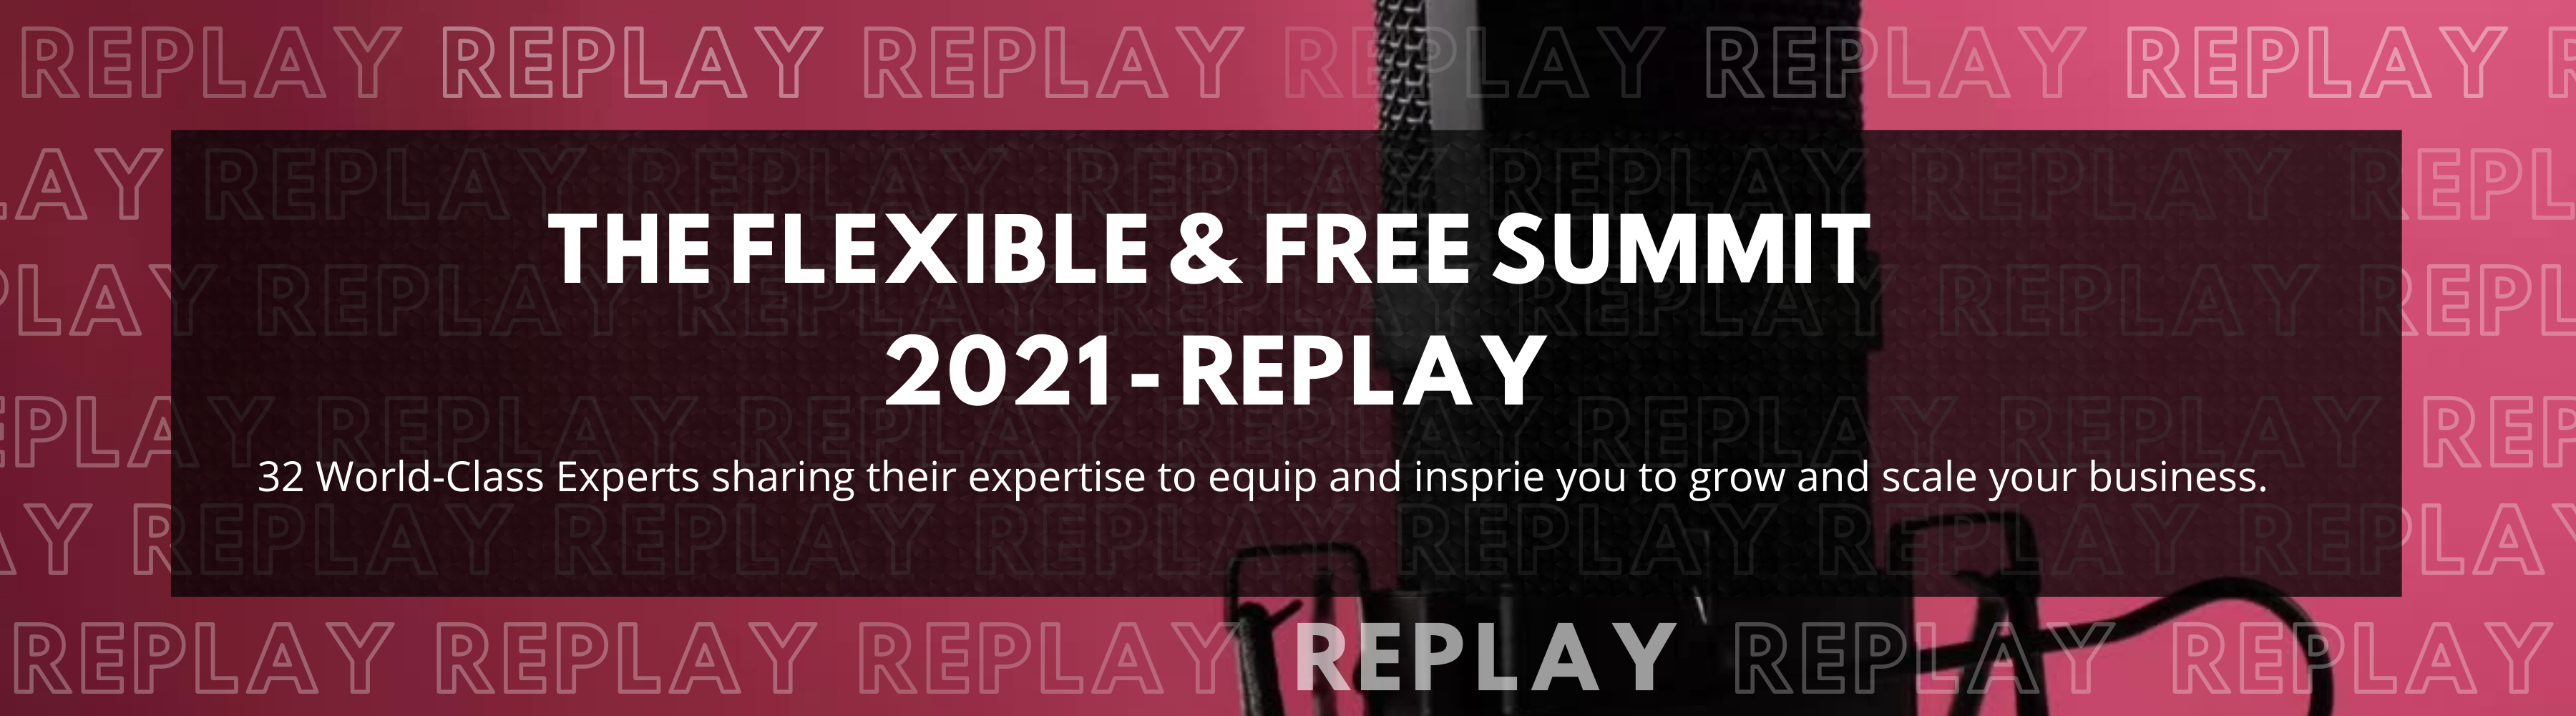 The Flexible & Free Summit 2021 - Replay